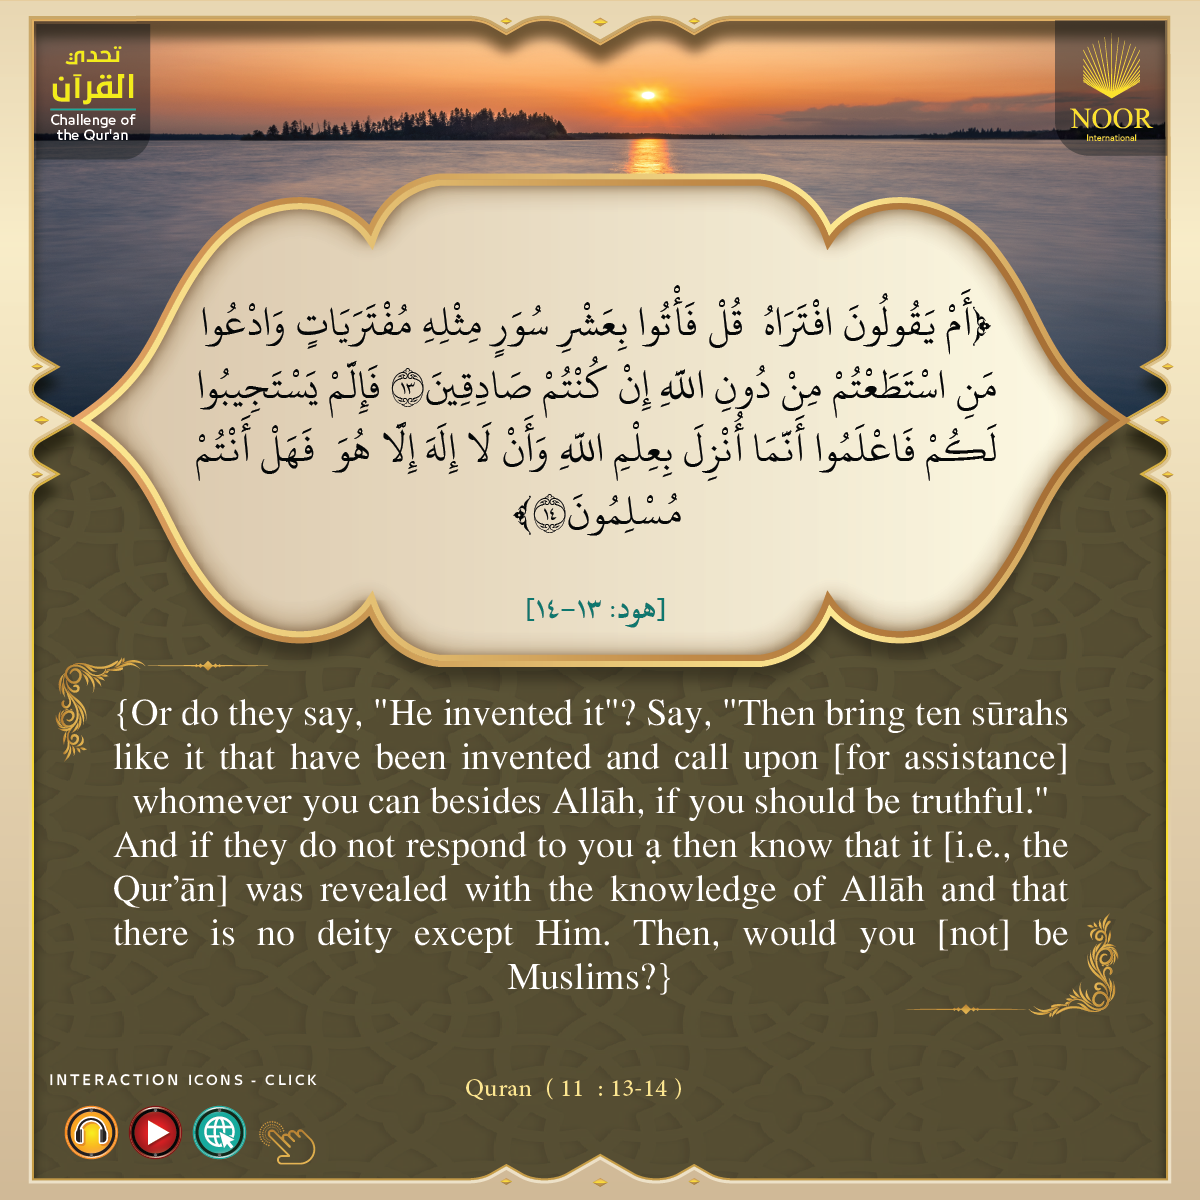 Challenge of the Qur'an